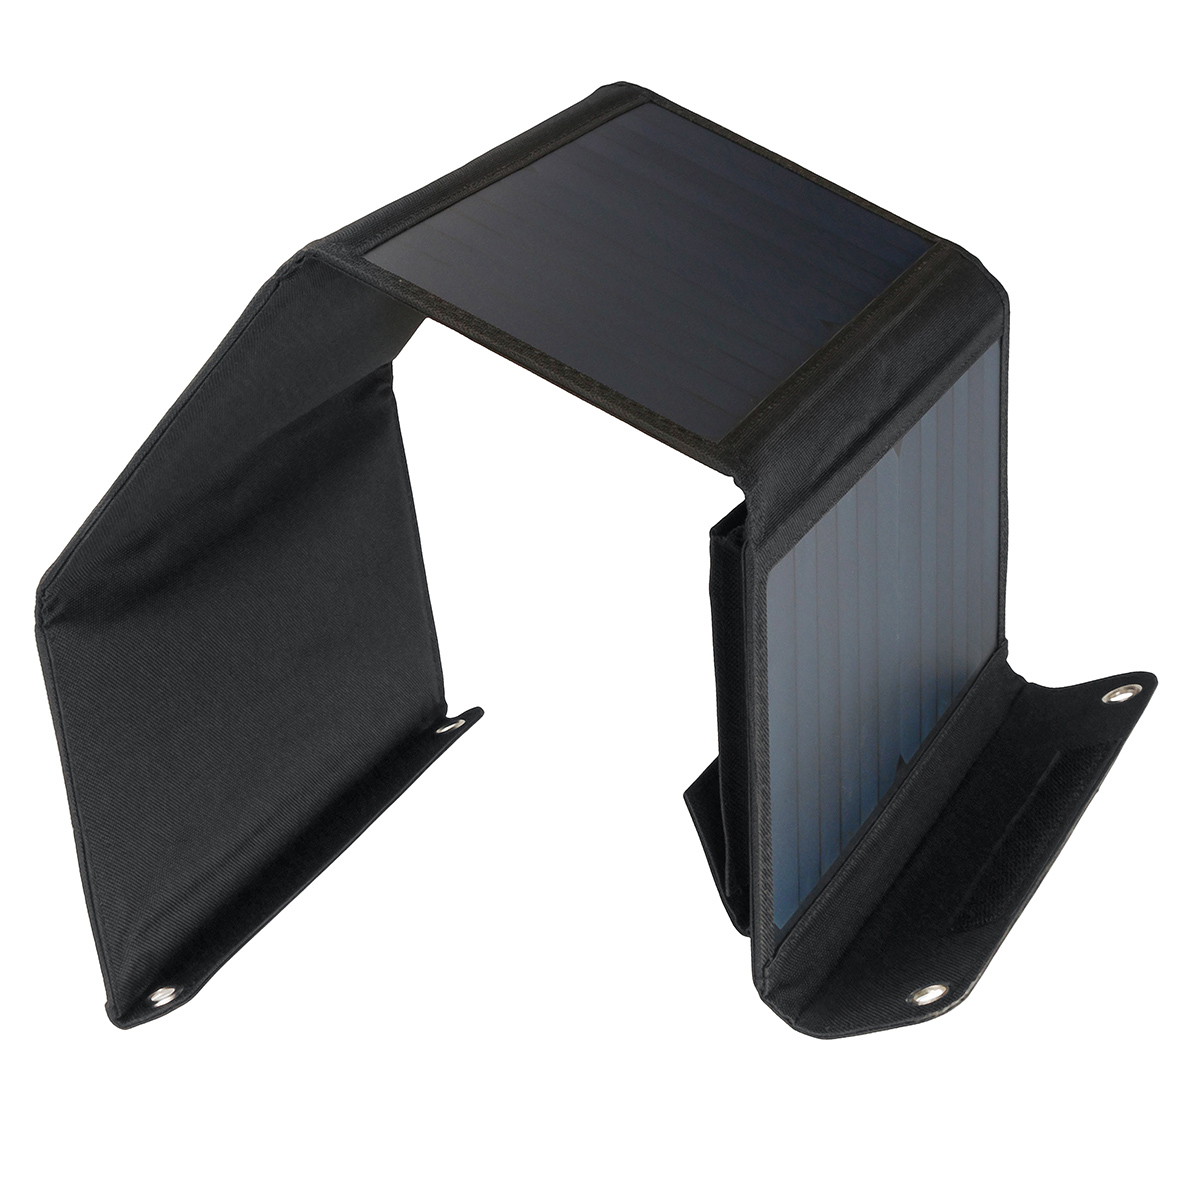 LEORY-28W-12V-Flodable-Solar-Panel-Sunpower-Cell-Panel-Solar-Charger-Generator-for-Smartphone-Tablet-1880494-9